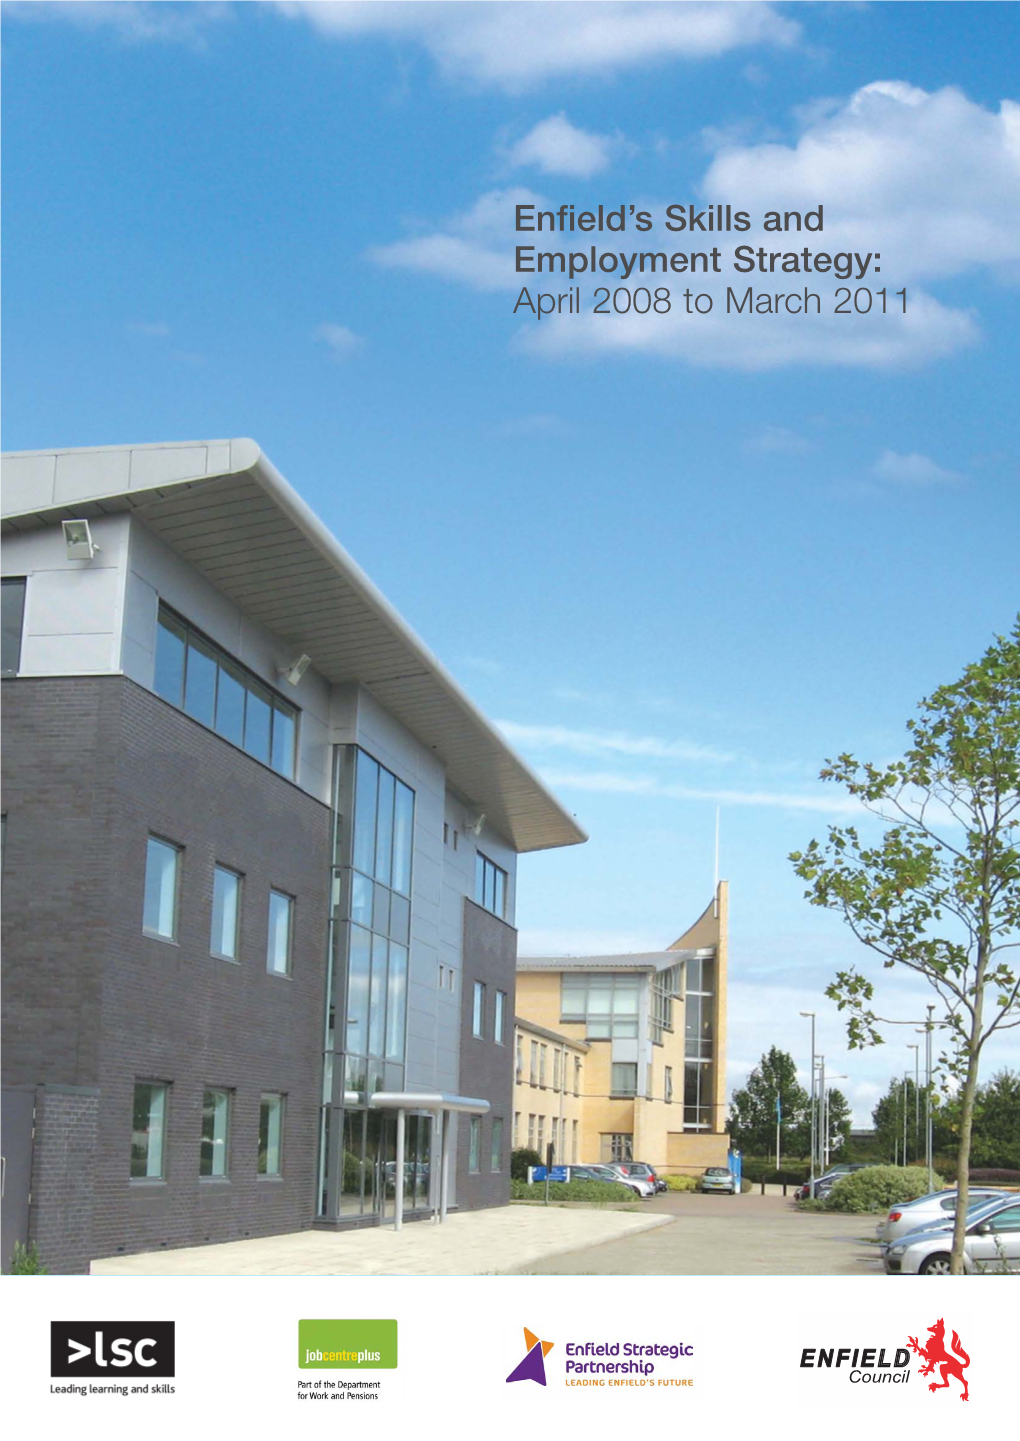 Enfield's Skills and Employment Strategy: April 2008 to March 2011